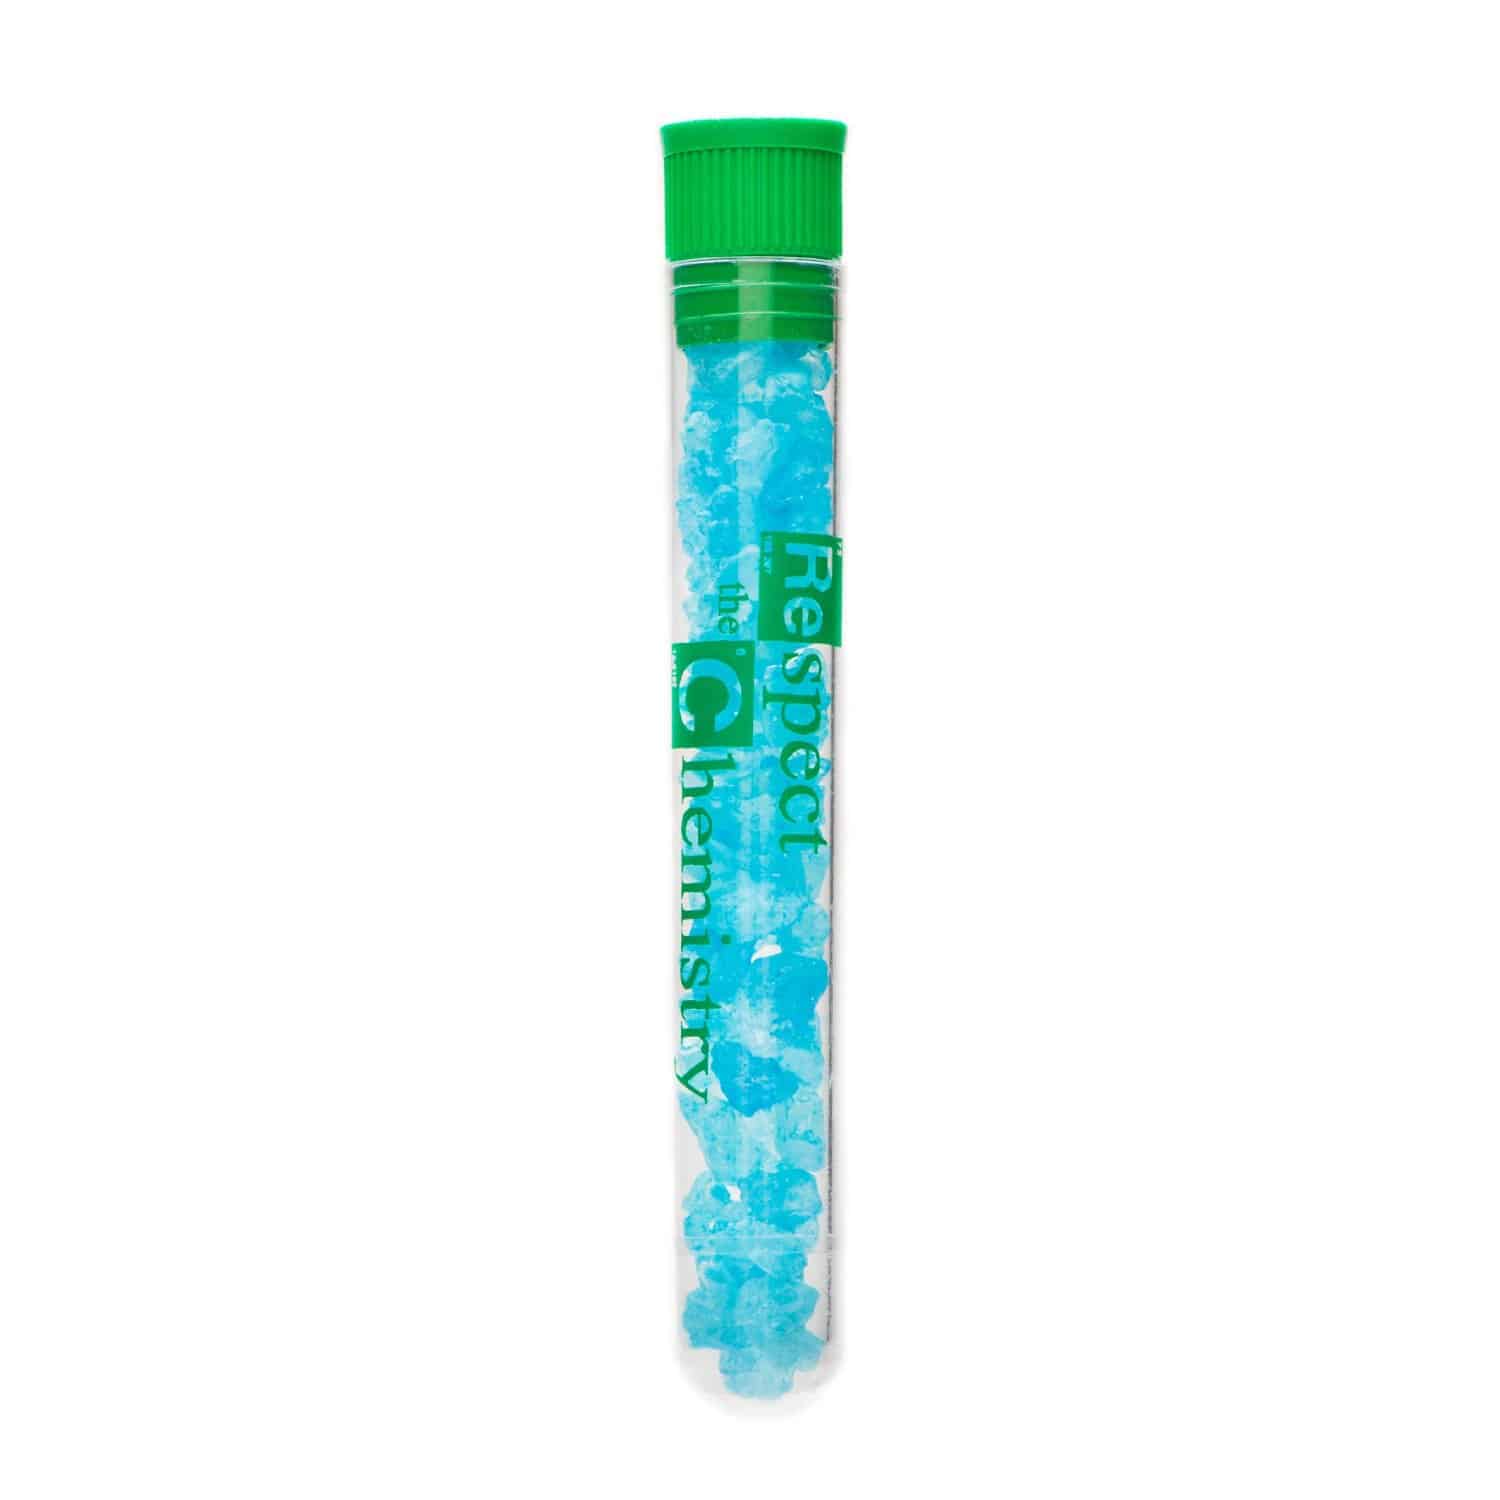 Blue Meth Candy Filled Test Tubes inspired by Breaking Bad Novelty Item